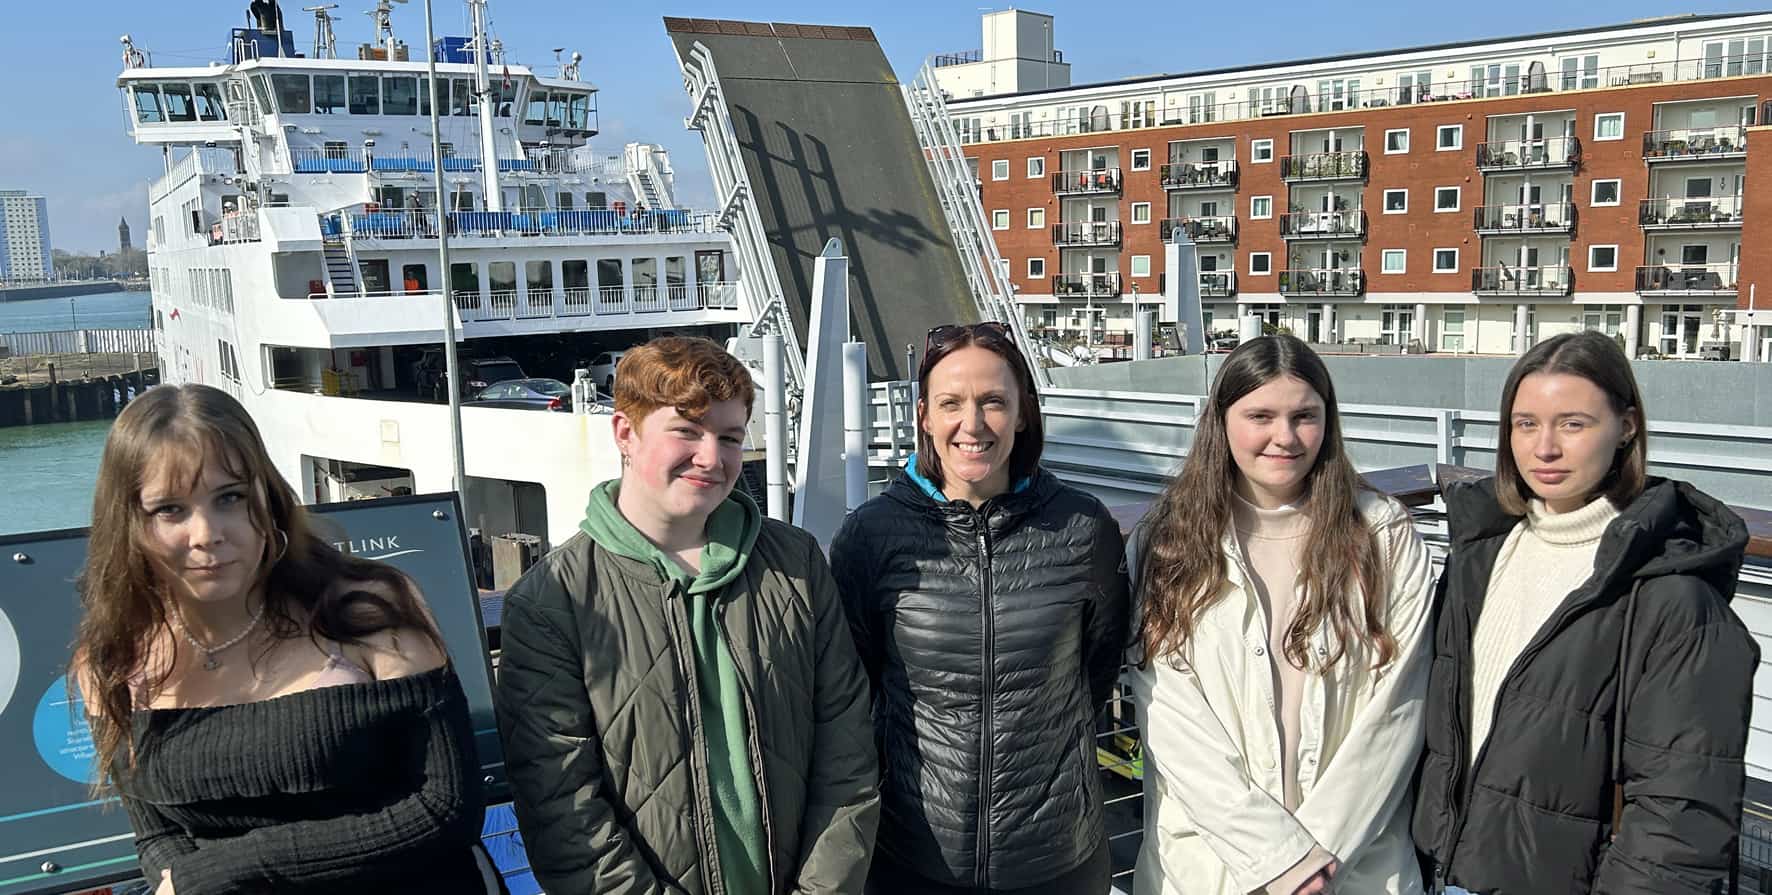 Travel and Tourism students Zakiya, Ewan, Abbie and Uliana with Isle of Wight College tutor Lindsay Davies (centre) at Wightlink’s Camber Café in Portsmouth